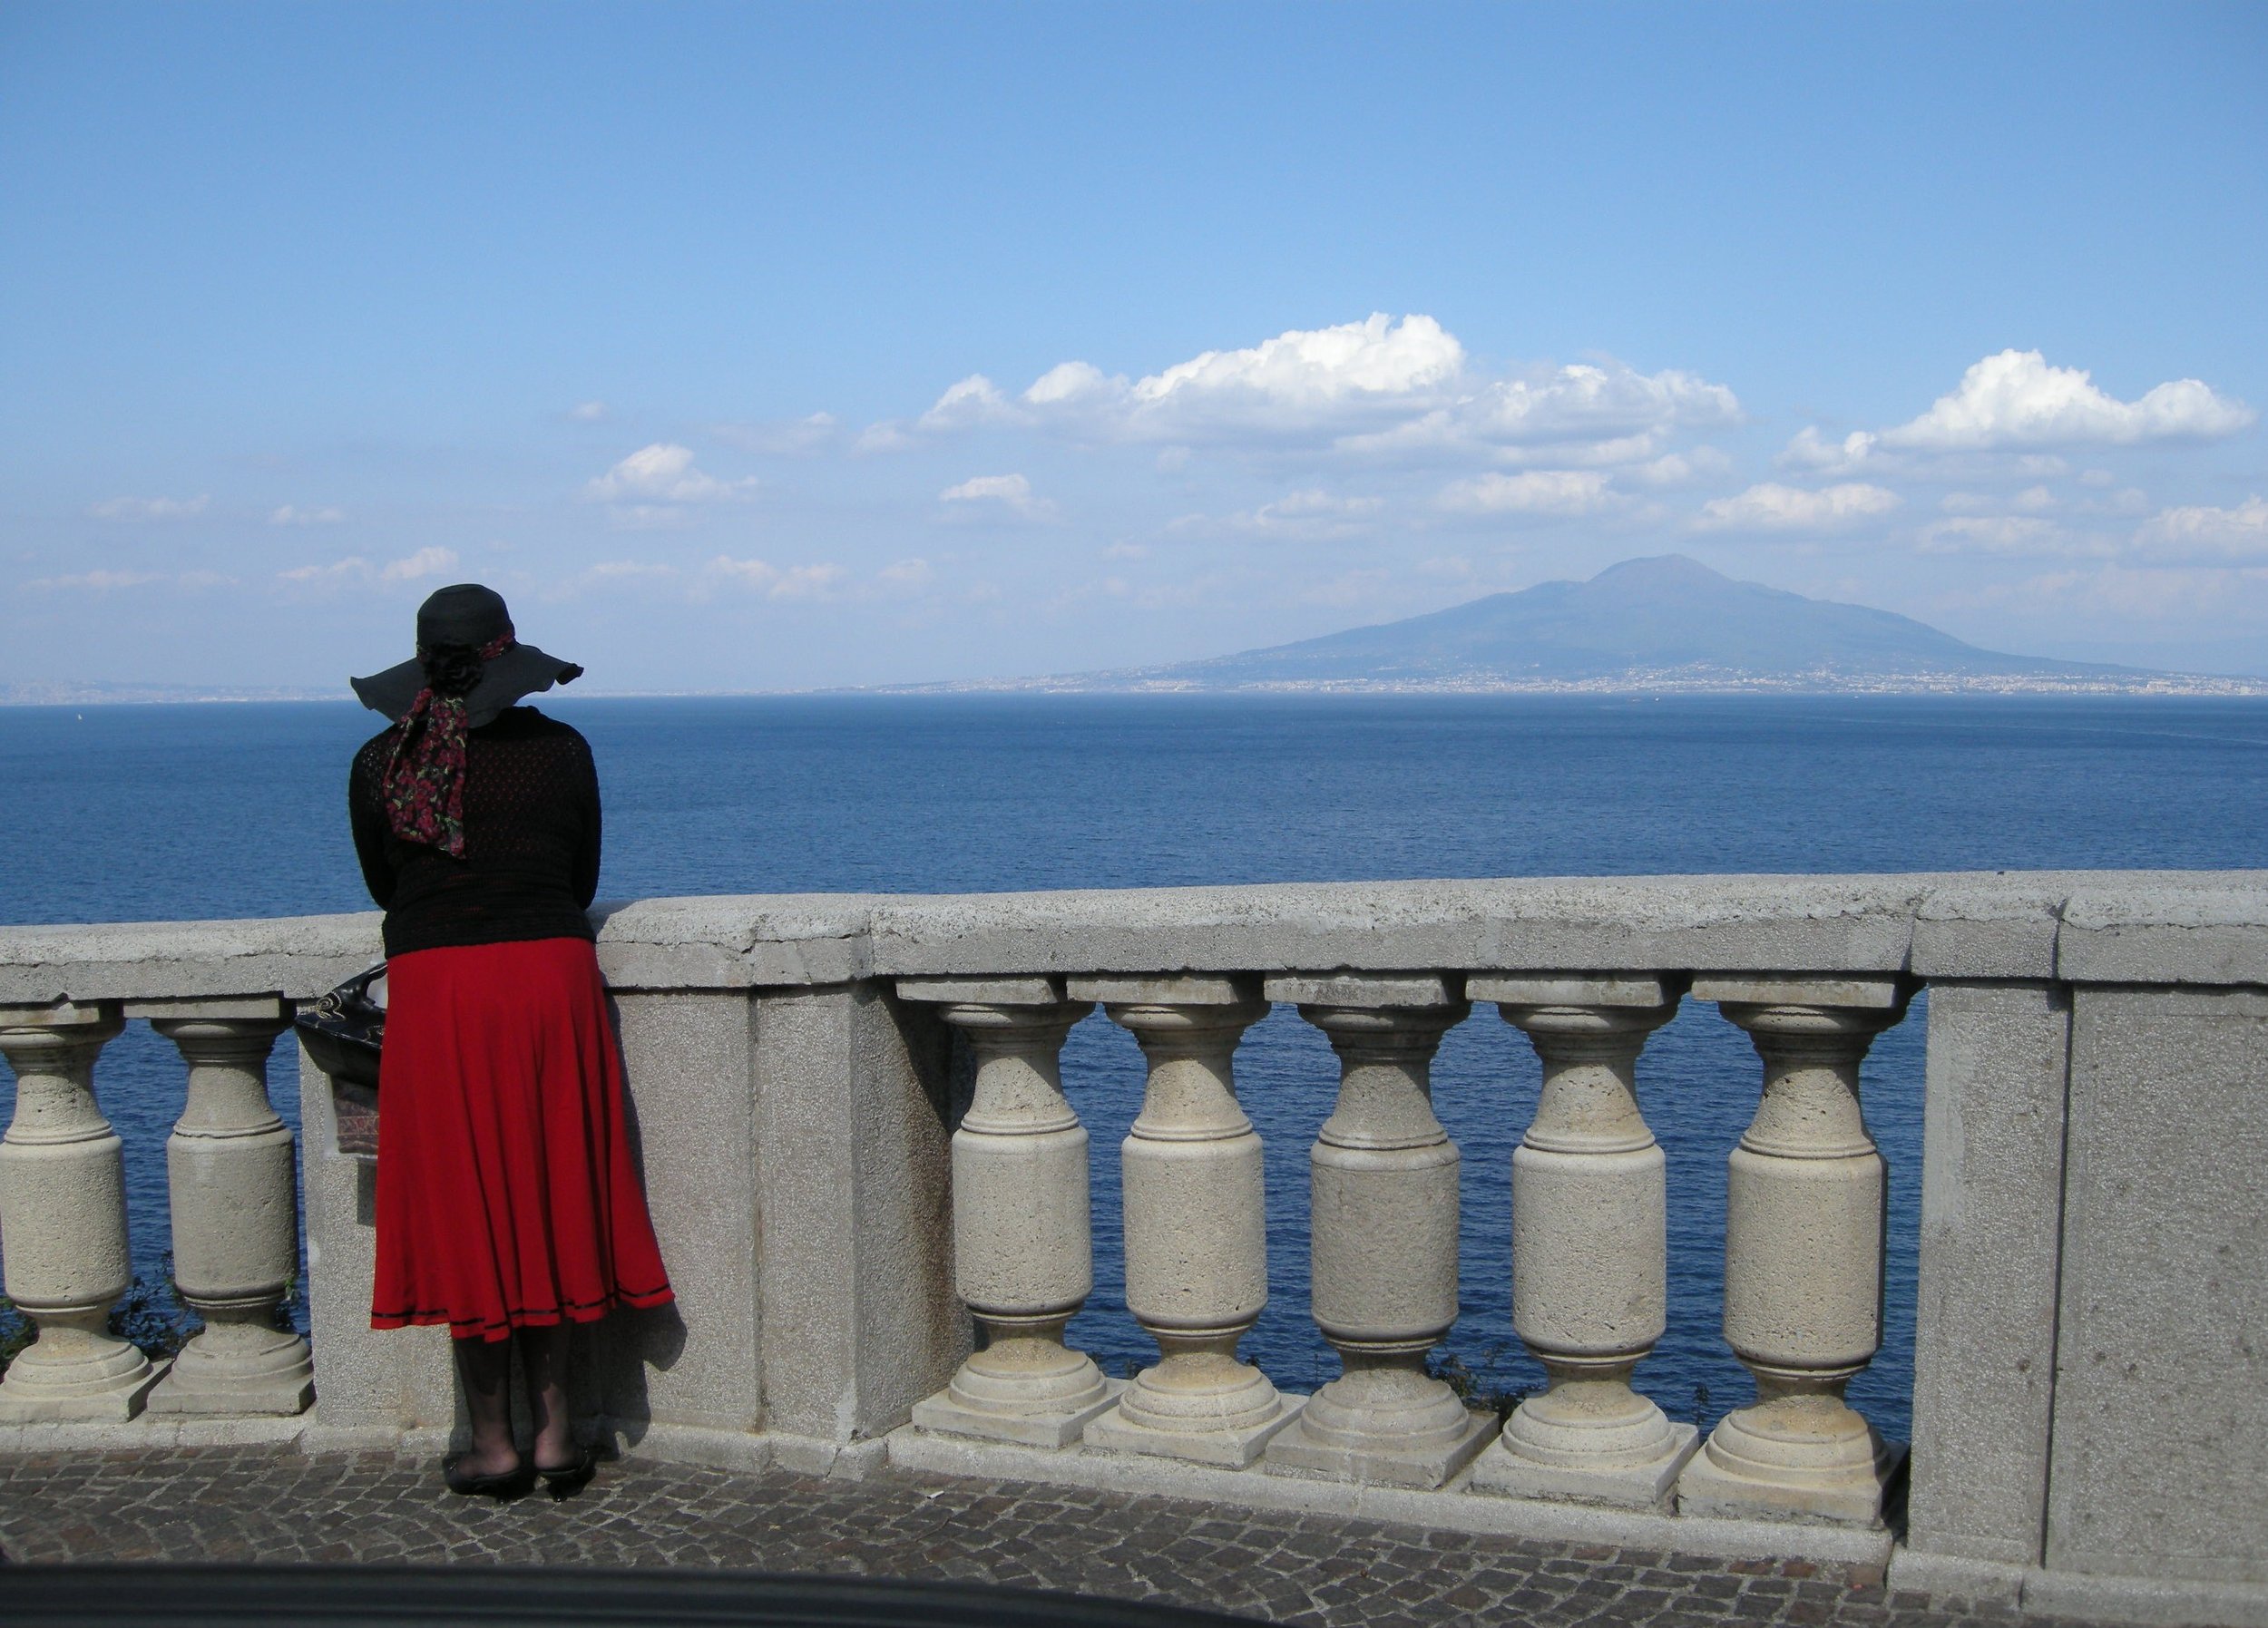 From Sorrento looking over the Bay of Naples towards Mt. Vesuvius, Italy.